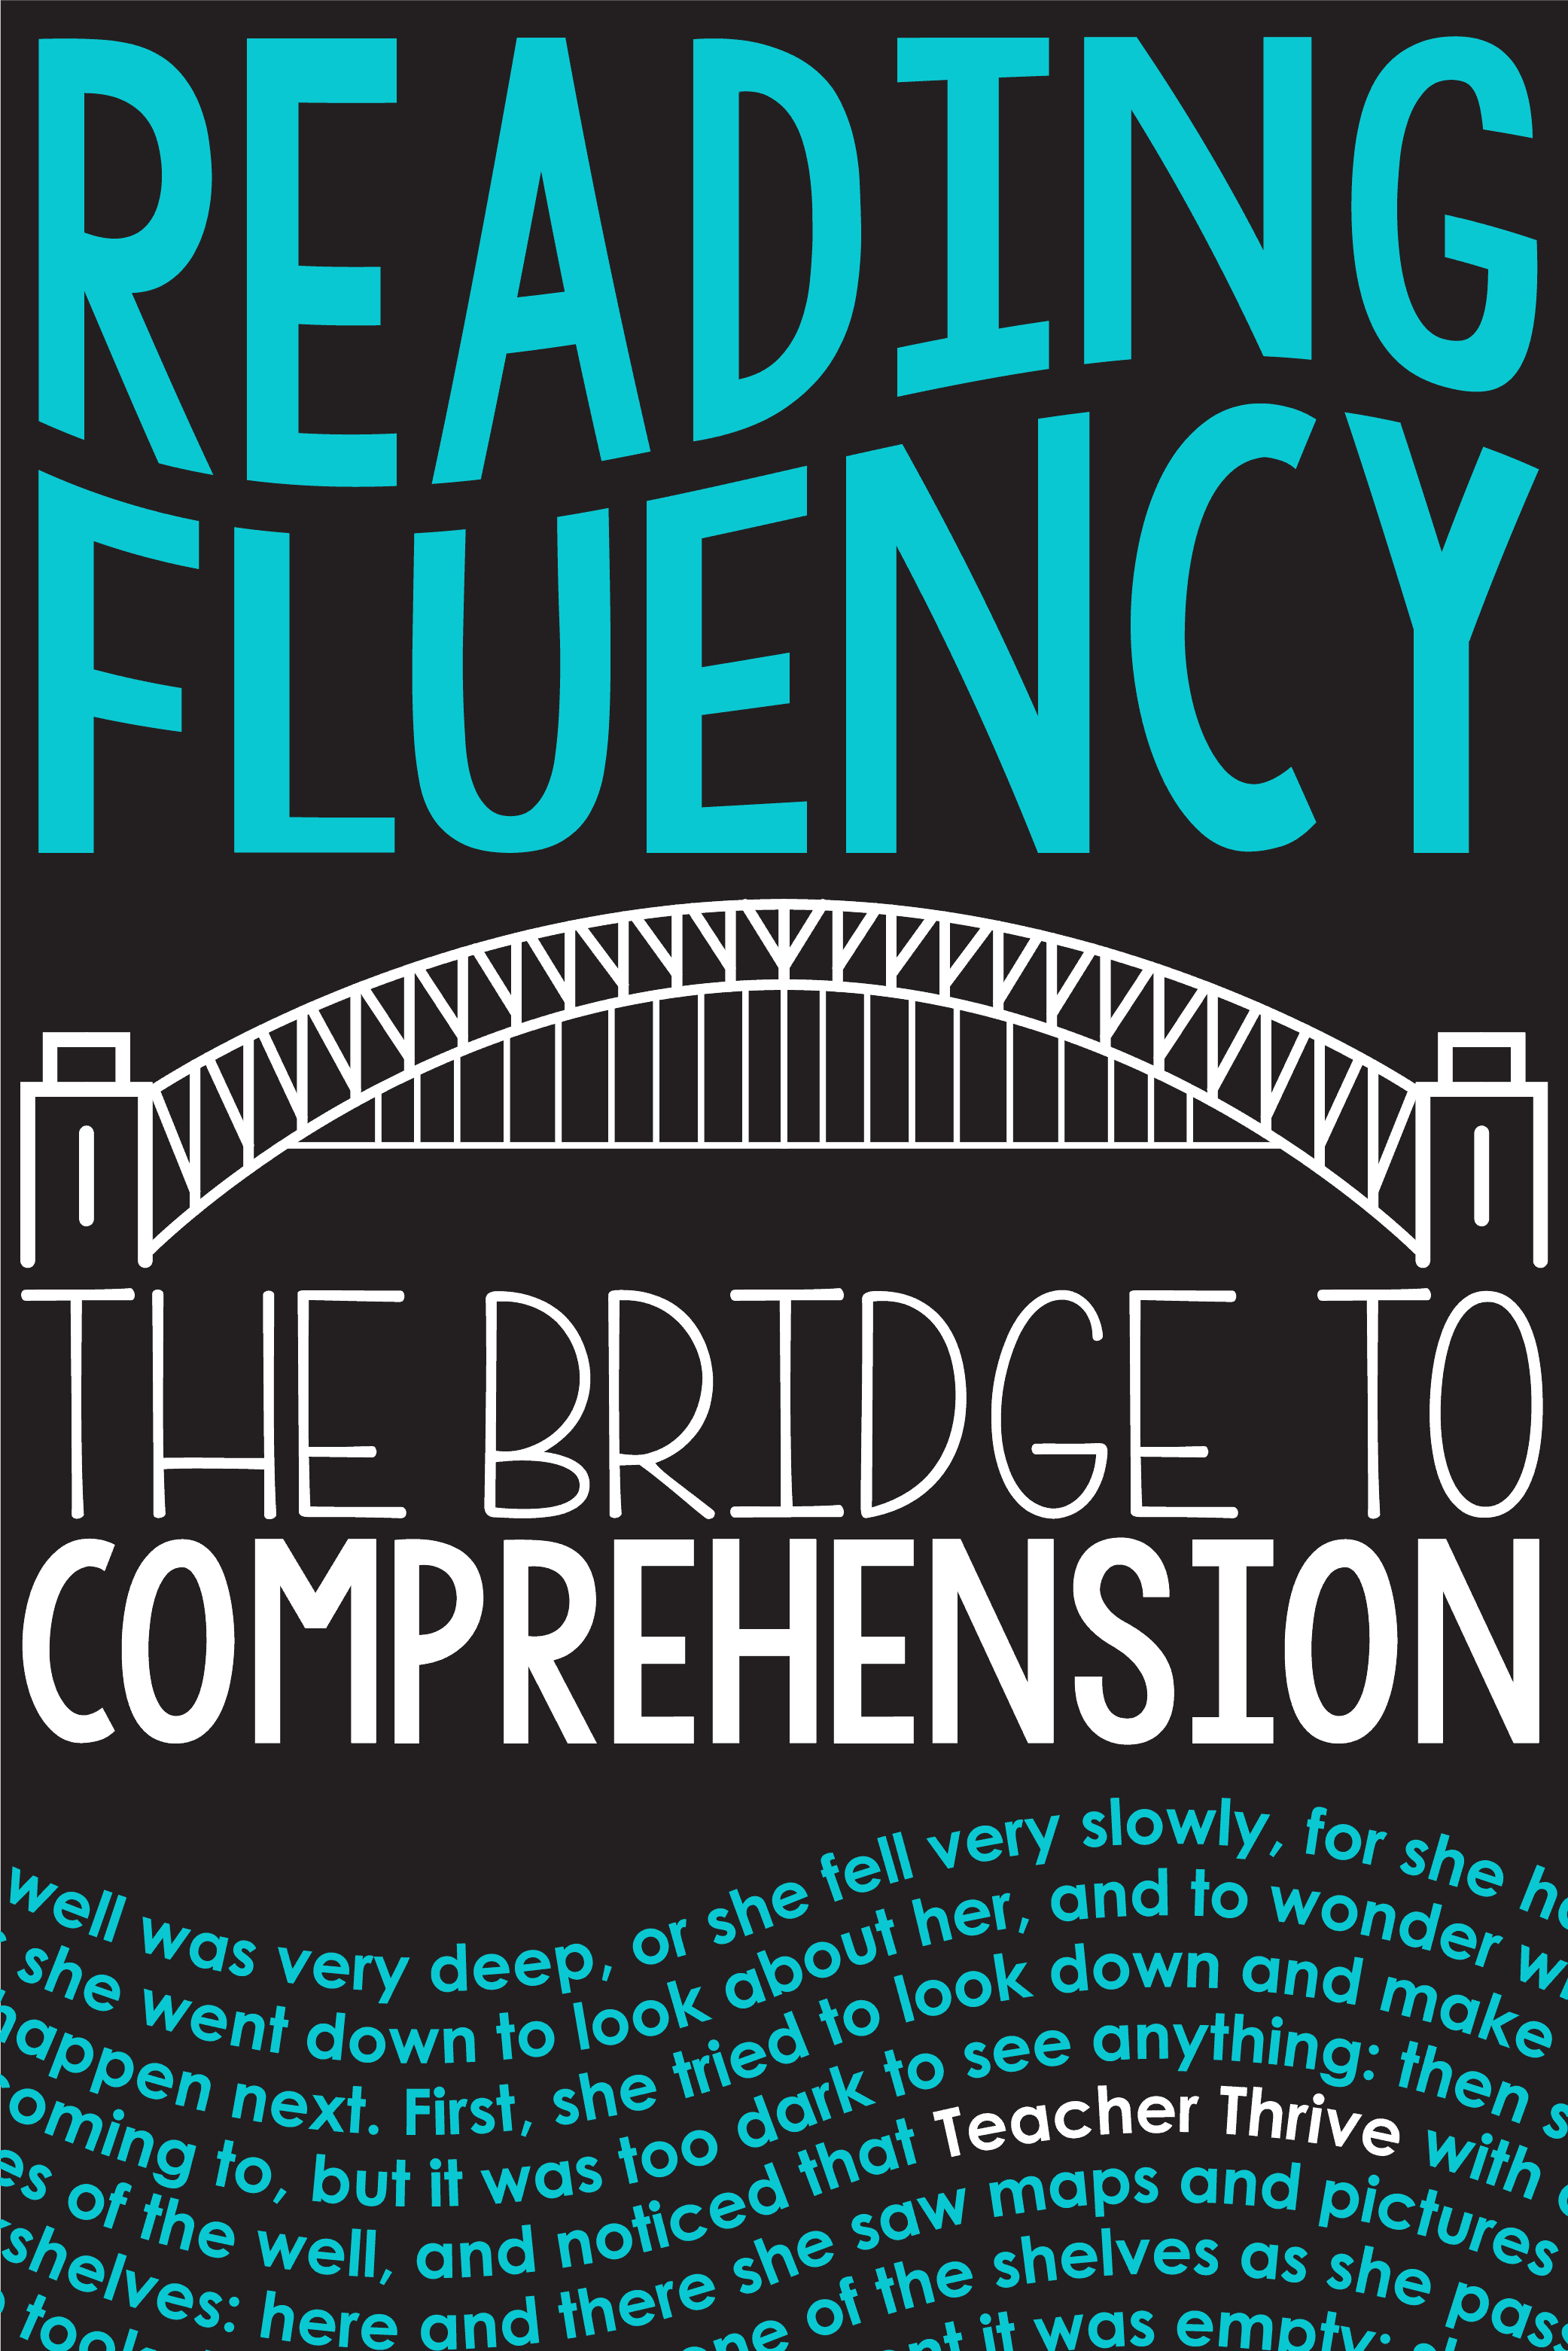 why-is-reading-fluency-so-important-teacher-thrive